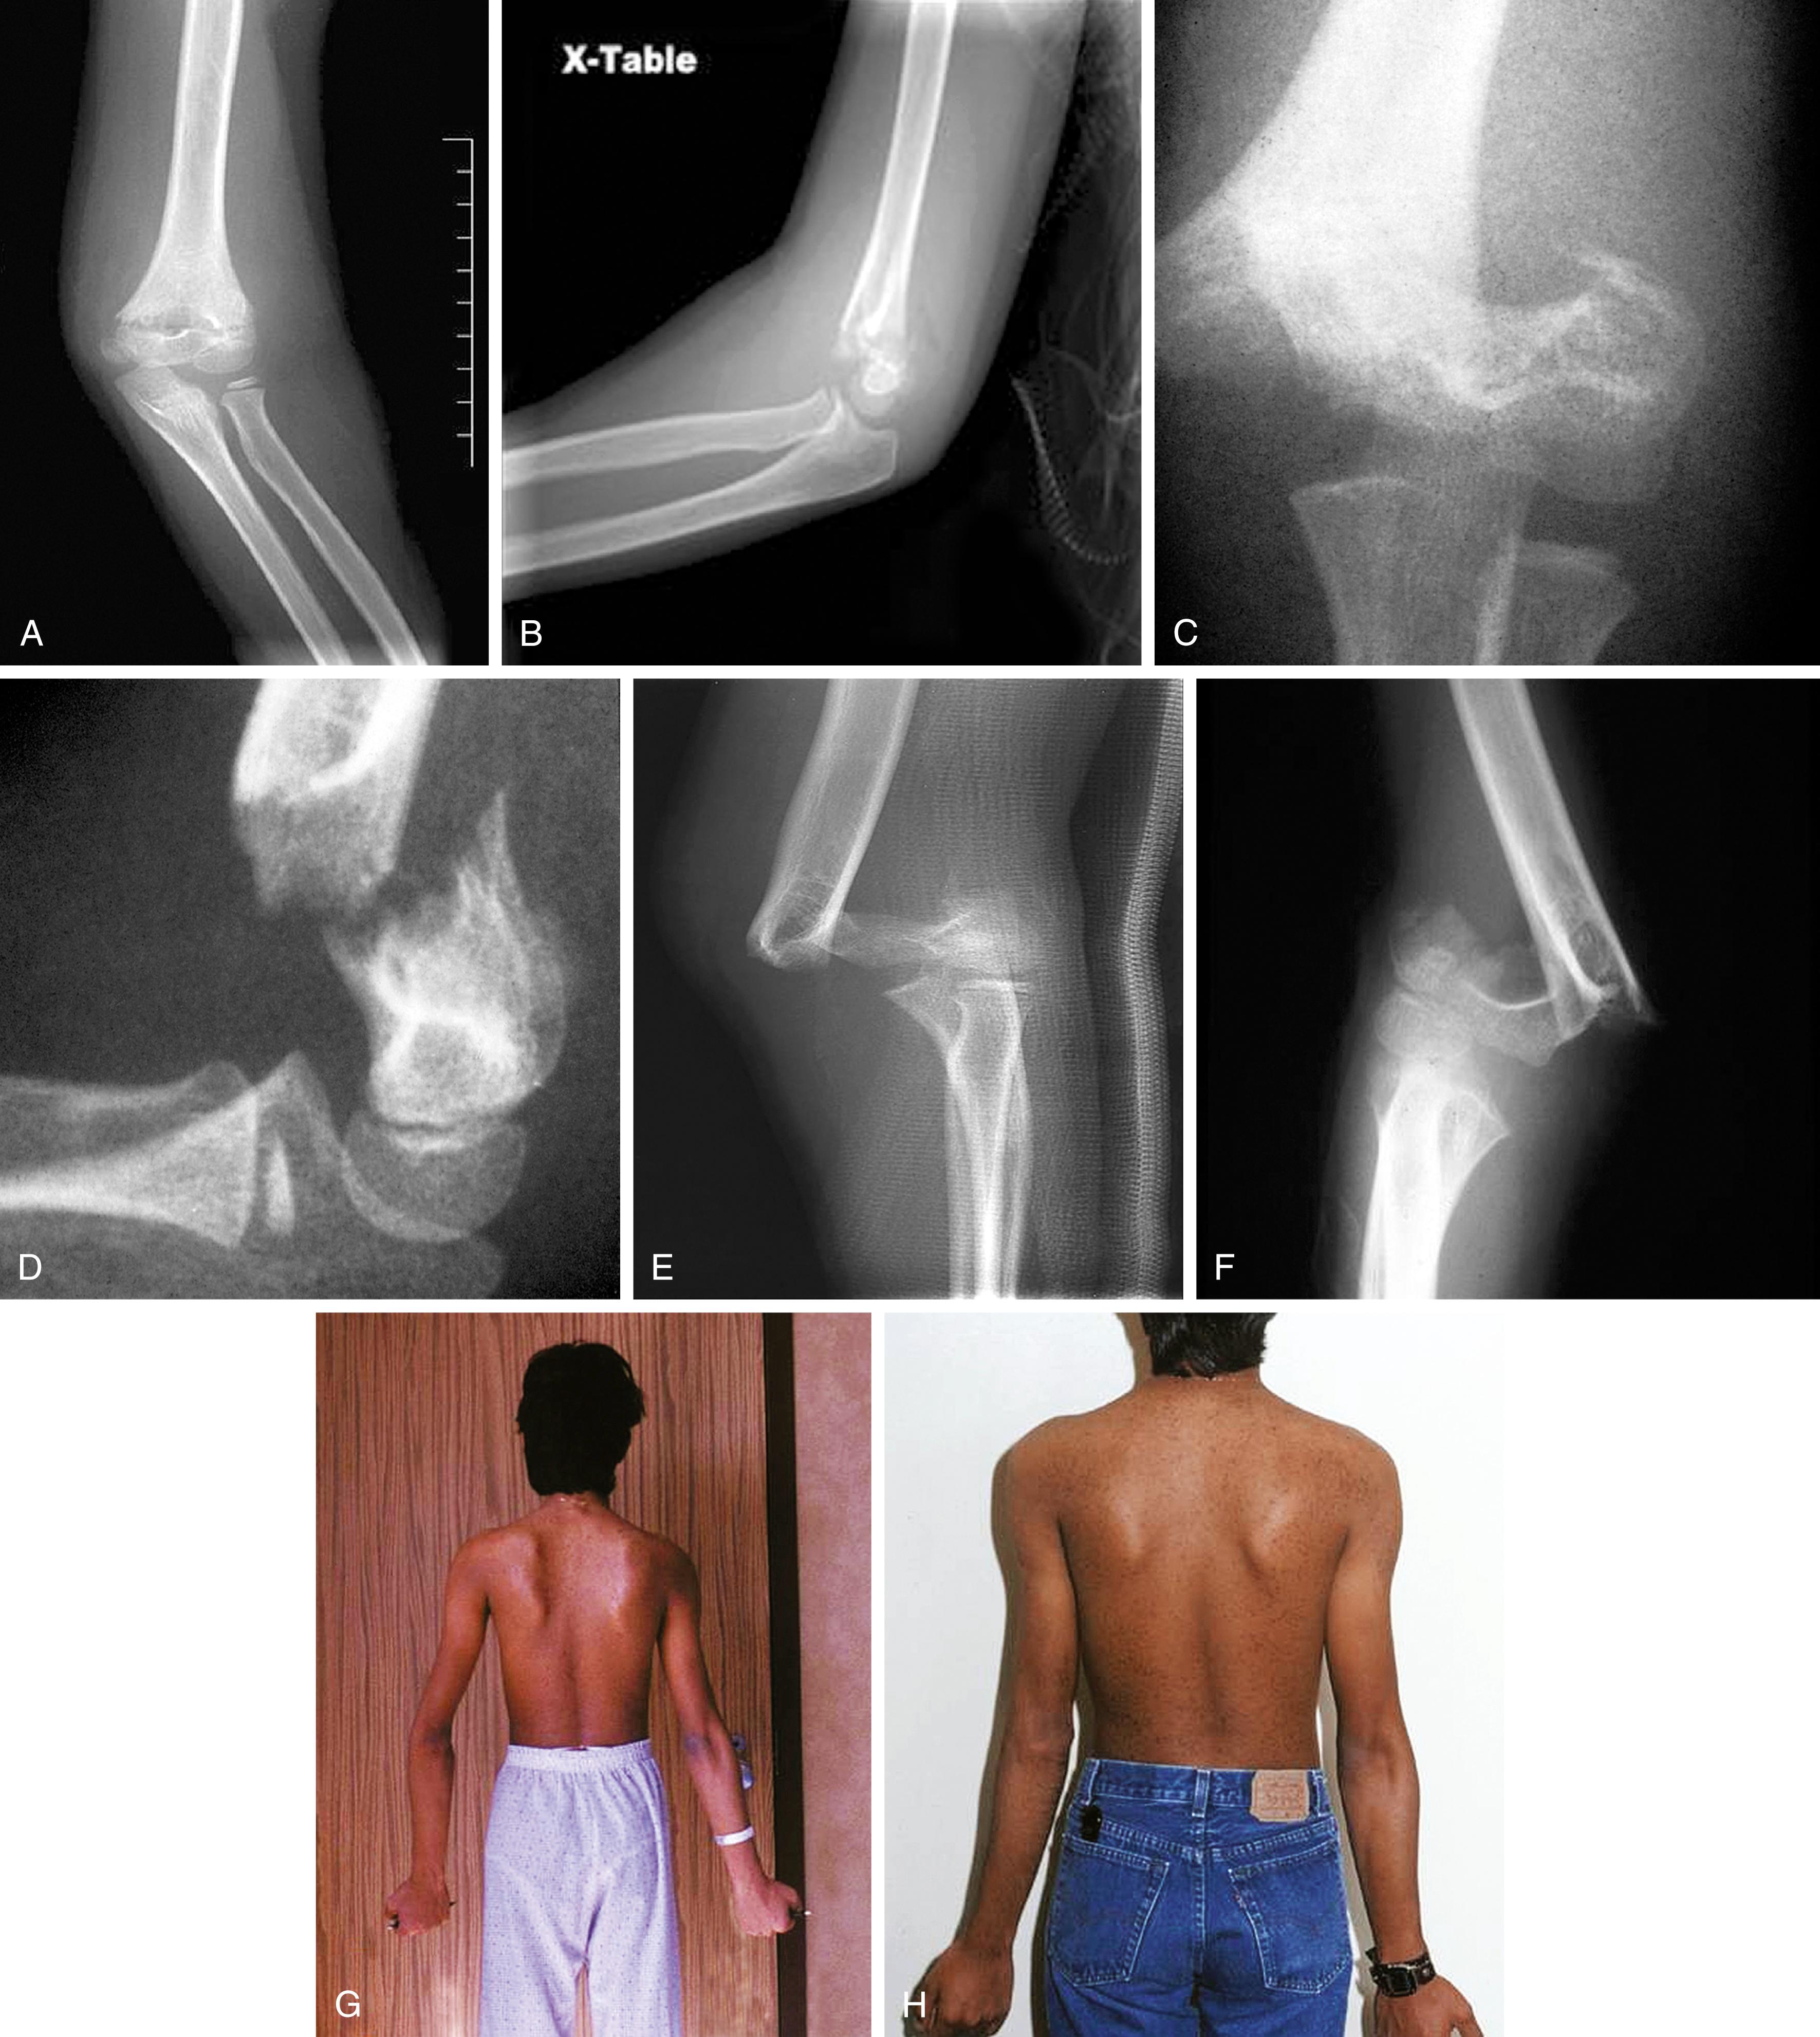 Fig. 22.34, Supracondylar humerus fractures. These injuries are typically the result of a fall backward onto an outstretched arm with the elbow in hyperextension. This transmits the force of the impact to the distal humerus, driving the distal fragment posteriorly. Most require surgery to realign, reduce, and stabilize the fracture. (A) This 8-year-old fell backward off a swing, landing on his hand with his elbow extended. The anteroposterior radiograph shows the fracture line crossing through the olecranon fossa in the supracondylar region of the distal humerus. Although there is marked soft tissue swelling, degree of displacement appears mild. (B) In the lateral view, moderate posterior displacement of the distal fragment is evident. There is also a positive fat pad sign. (C) In another boy, after a more severe backward fall, the anteroposterior radiograph shows the distal fragment displaced radially. (D) In the lateral view, significant posterior displacement is evident. (E and F) In this case an 8-year-old fell backward from a barn window onto his extended arm. This resulted in a severely displaced (type III) supracondylar fracture with associated injury to the brachial artery and vascular insufficiency of the forearm and hand, manifest by a cool hand and absent pulses. The distal fragment is displaced posterolaterally. In such cases, the brachial artery may be placed on “stretch” over the proximal fragment or may be entrapped between fragments. This is a true surgical emergency requiring immediate surgery to reduce the fracture and restore distal blood flow. (G) This boy has cubitus valgus deformity of his left elbow as a result of incorrect healing of a supracondylar fracture. (H) This was corrected by a distal humerus osteotomy, restoring normal contour to the elbow.